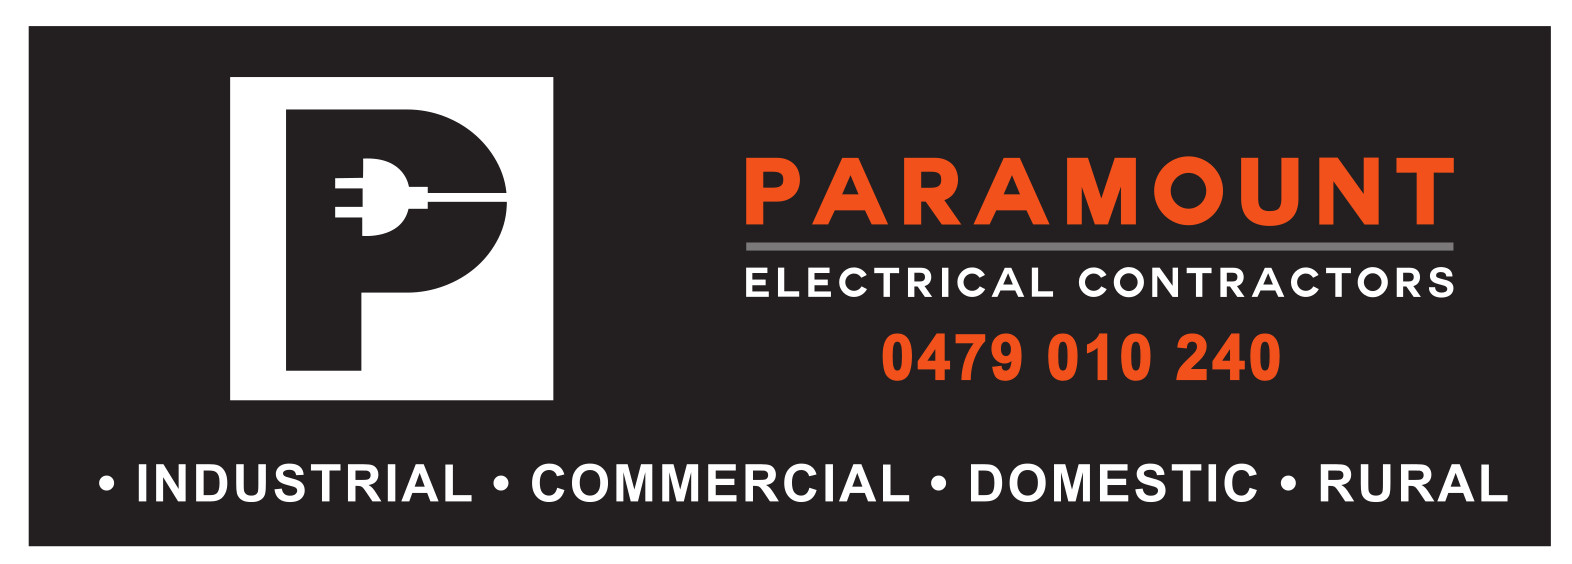 Paramount Electrical Contractors